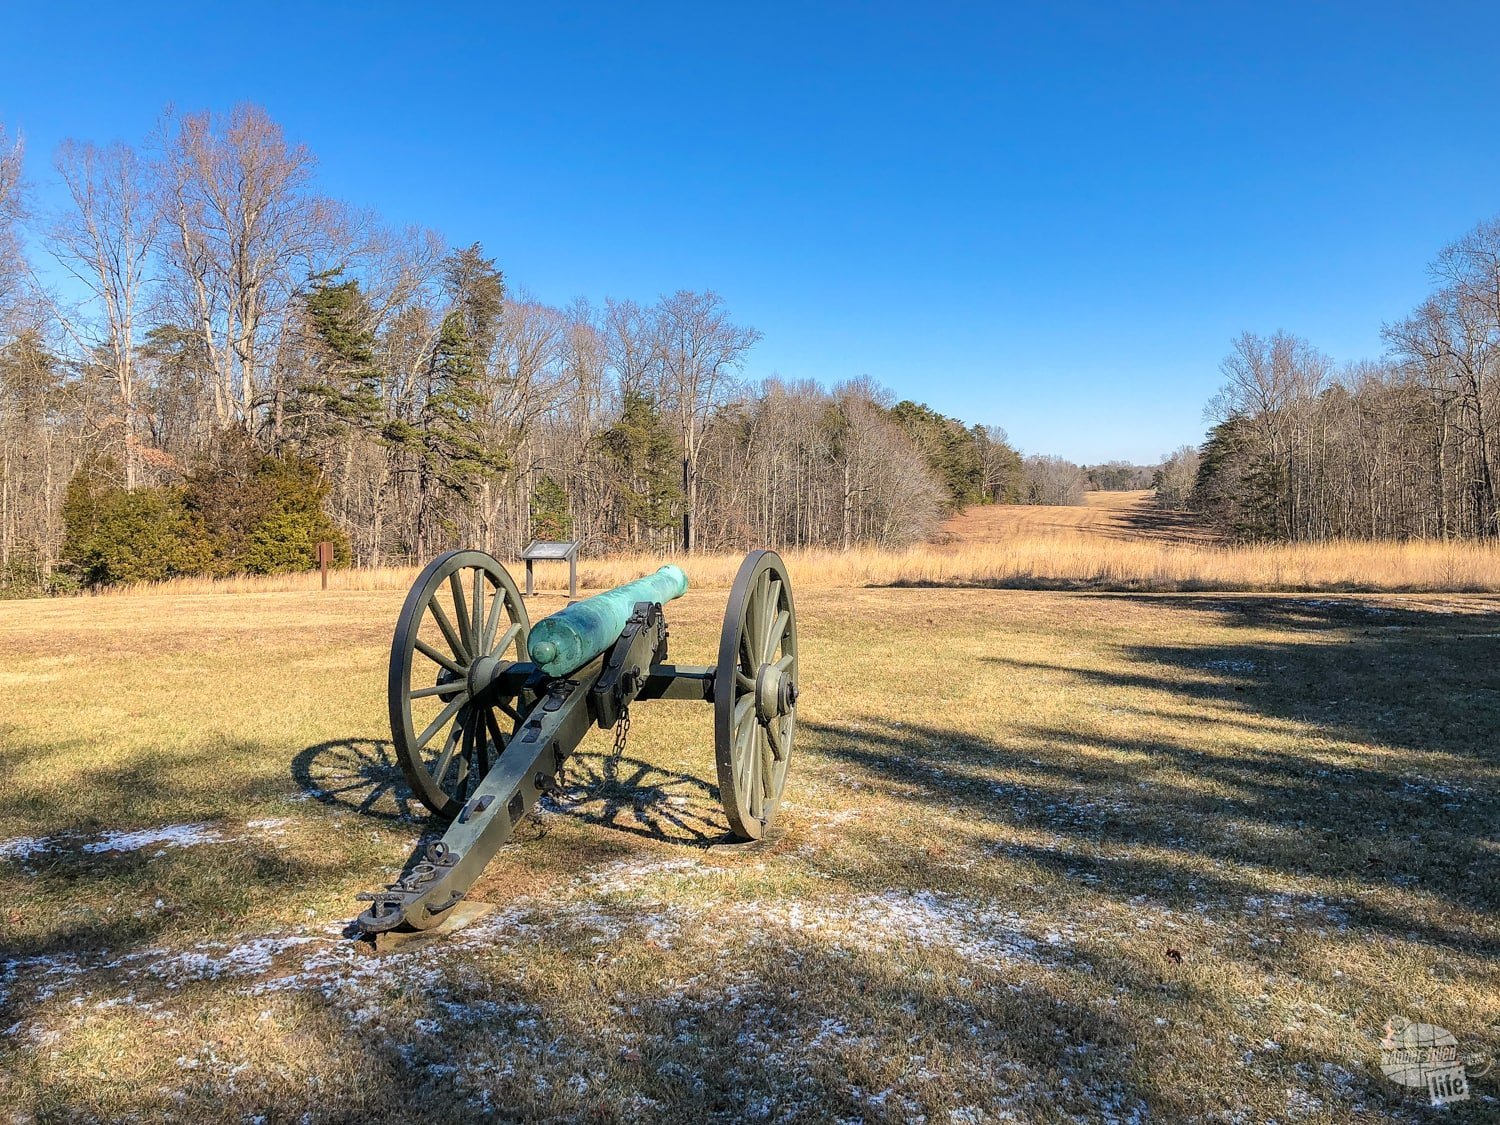 The High Ground of Chancellorsville